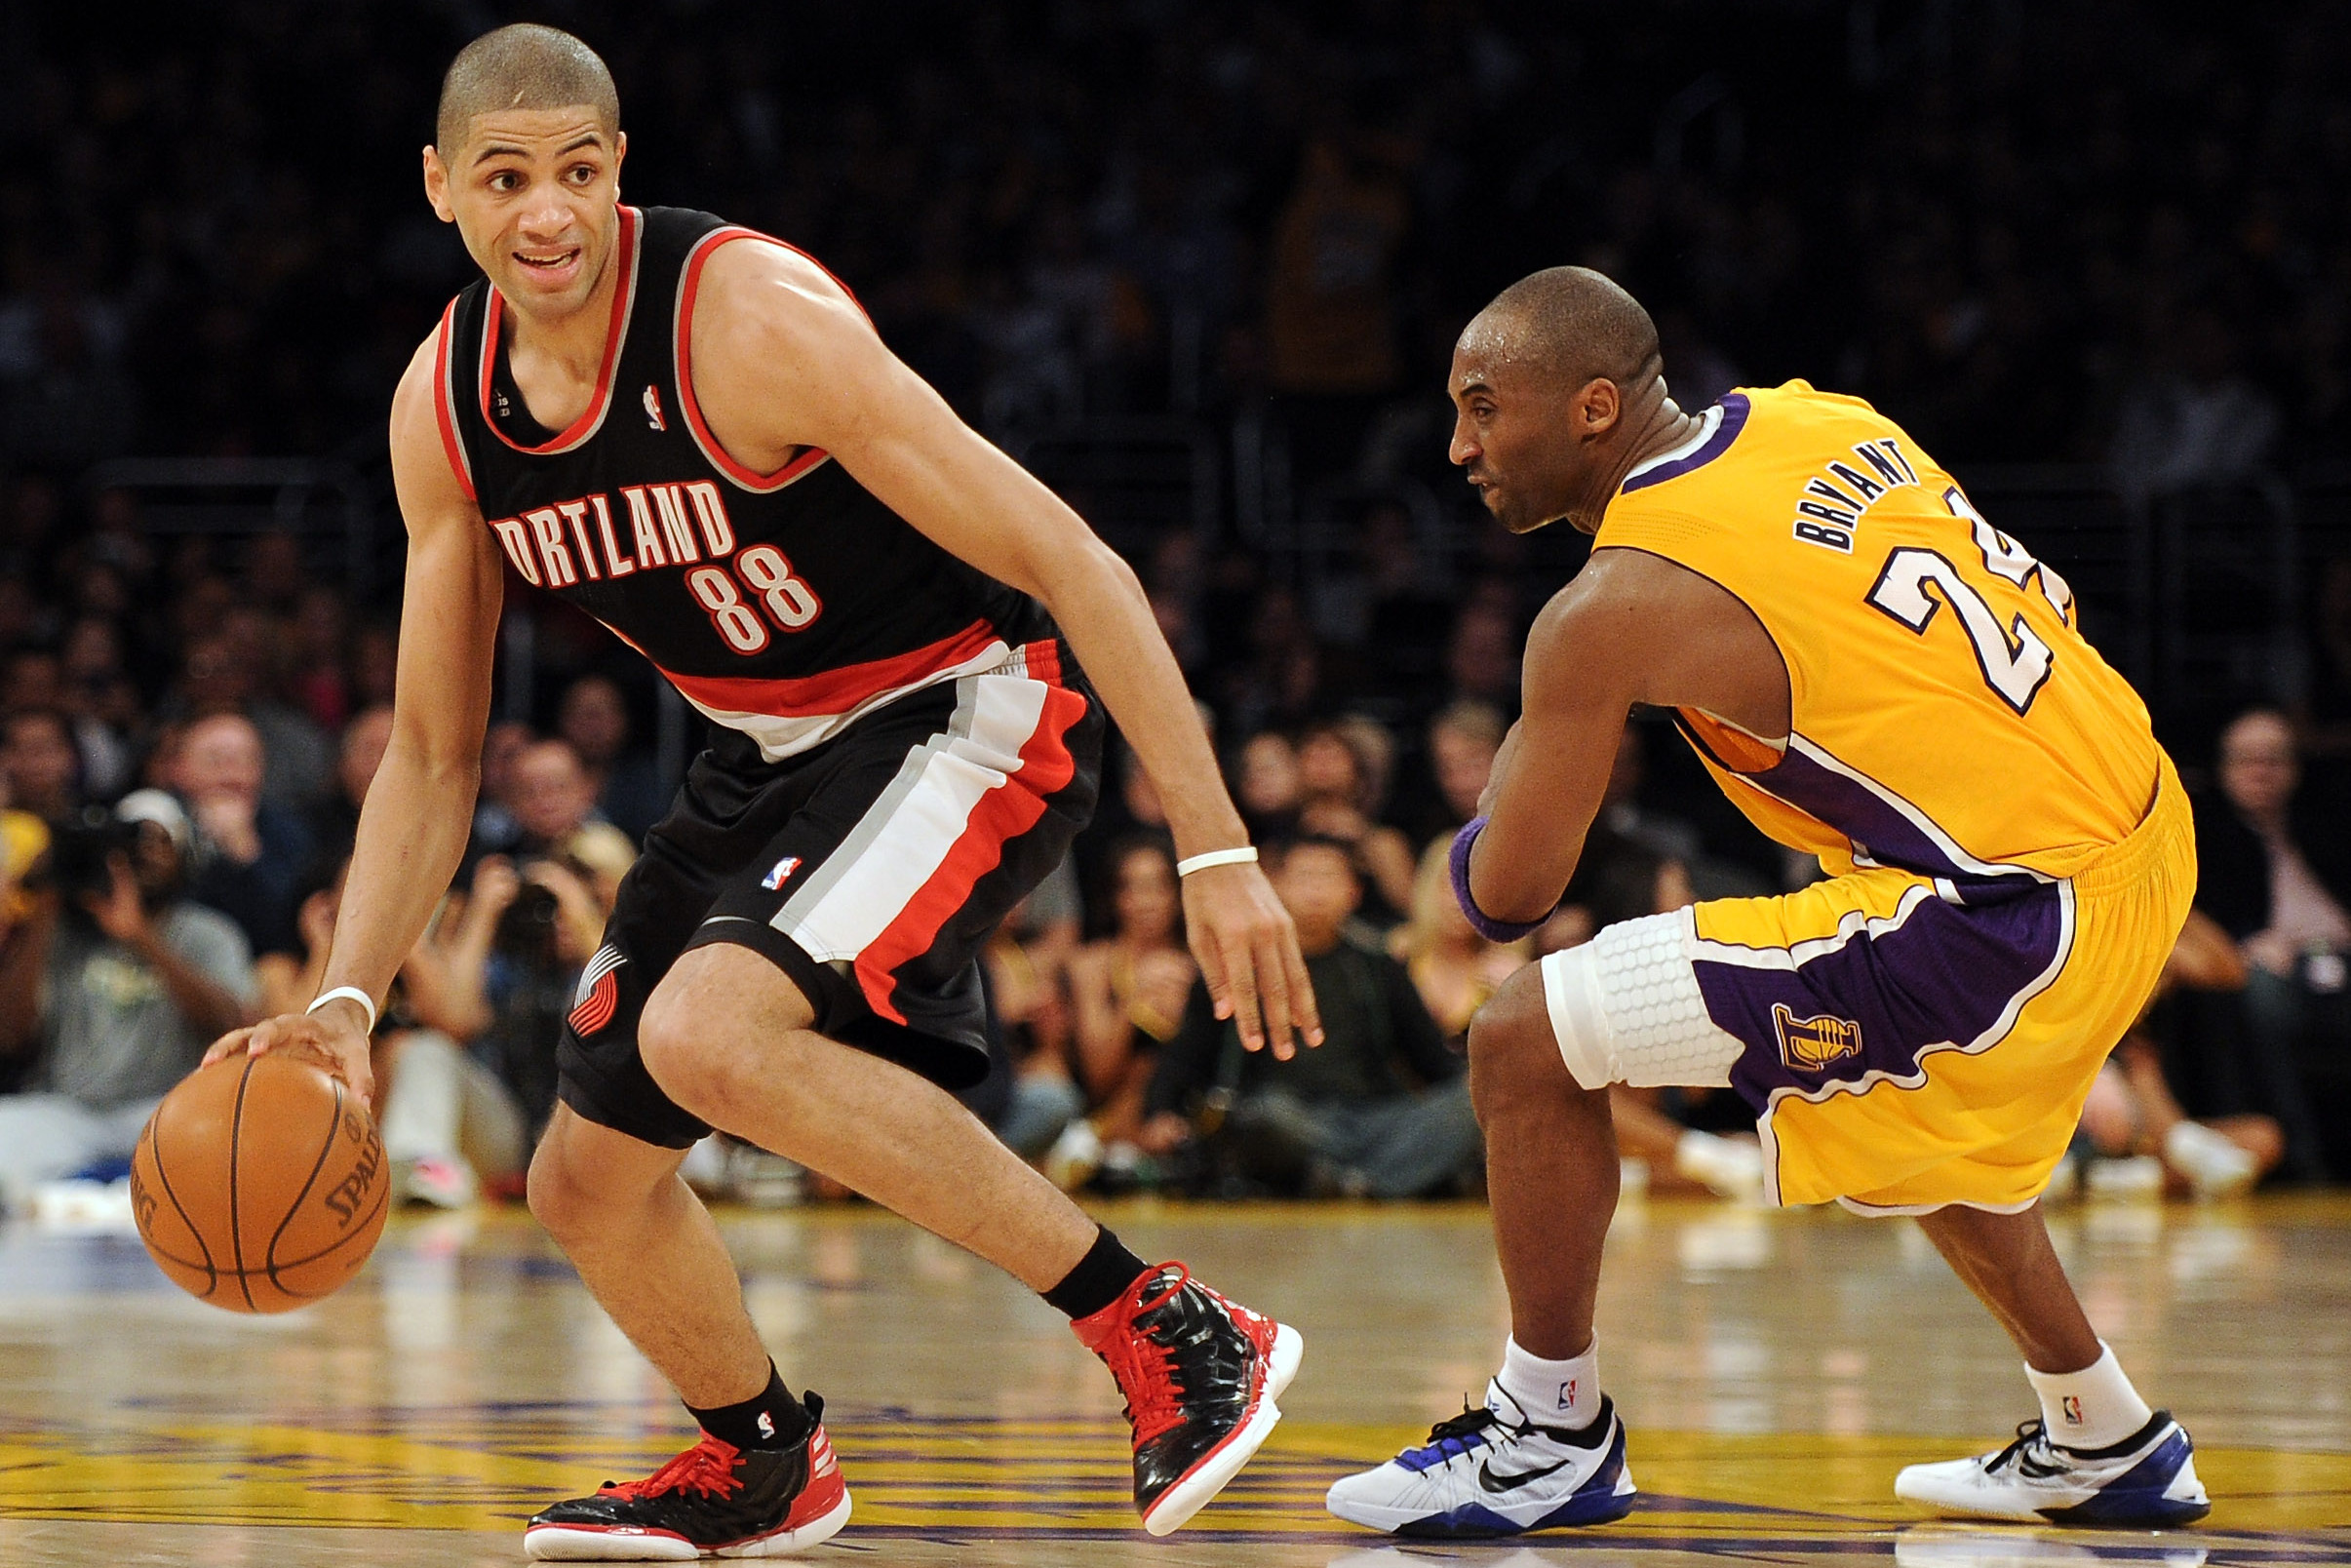 Is it crazy to think Nicolas Batum could help the Trail Blazers?